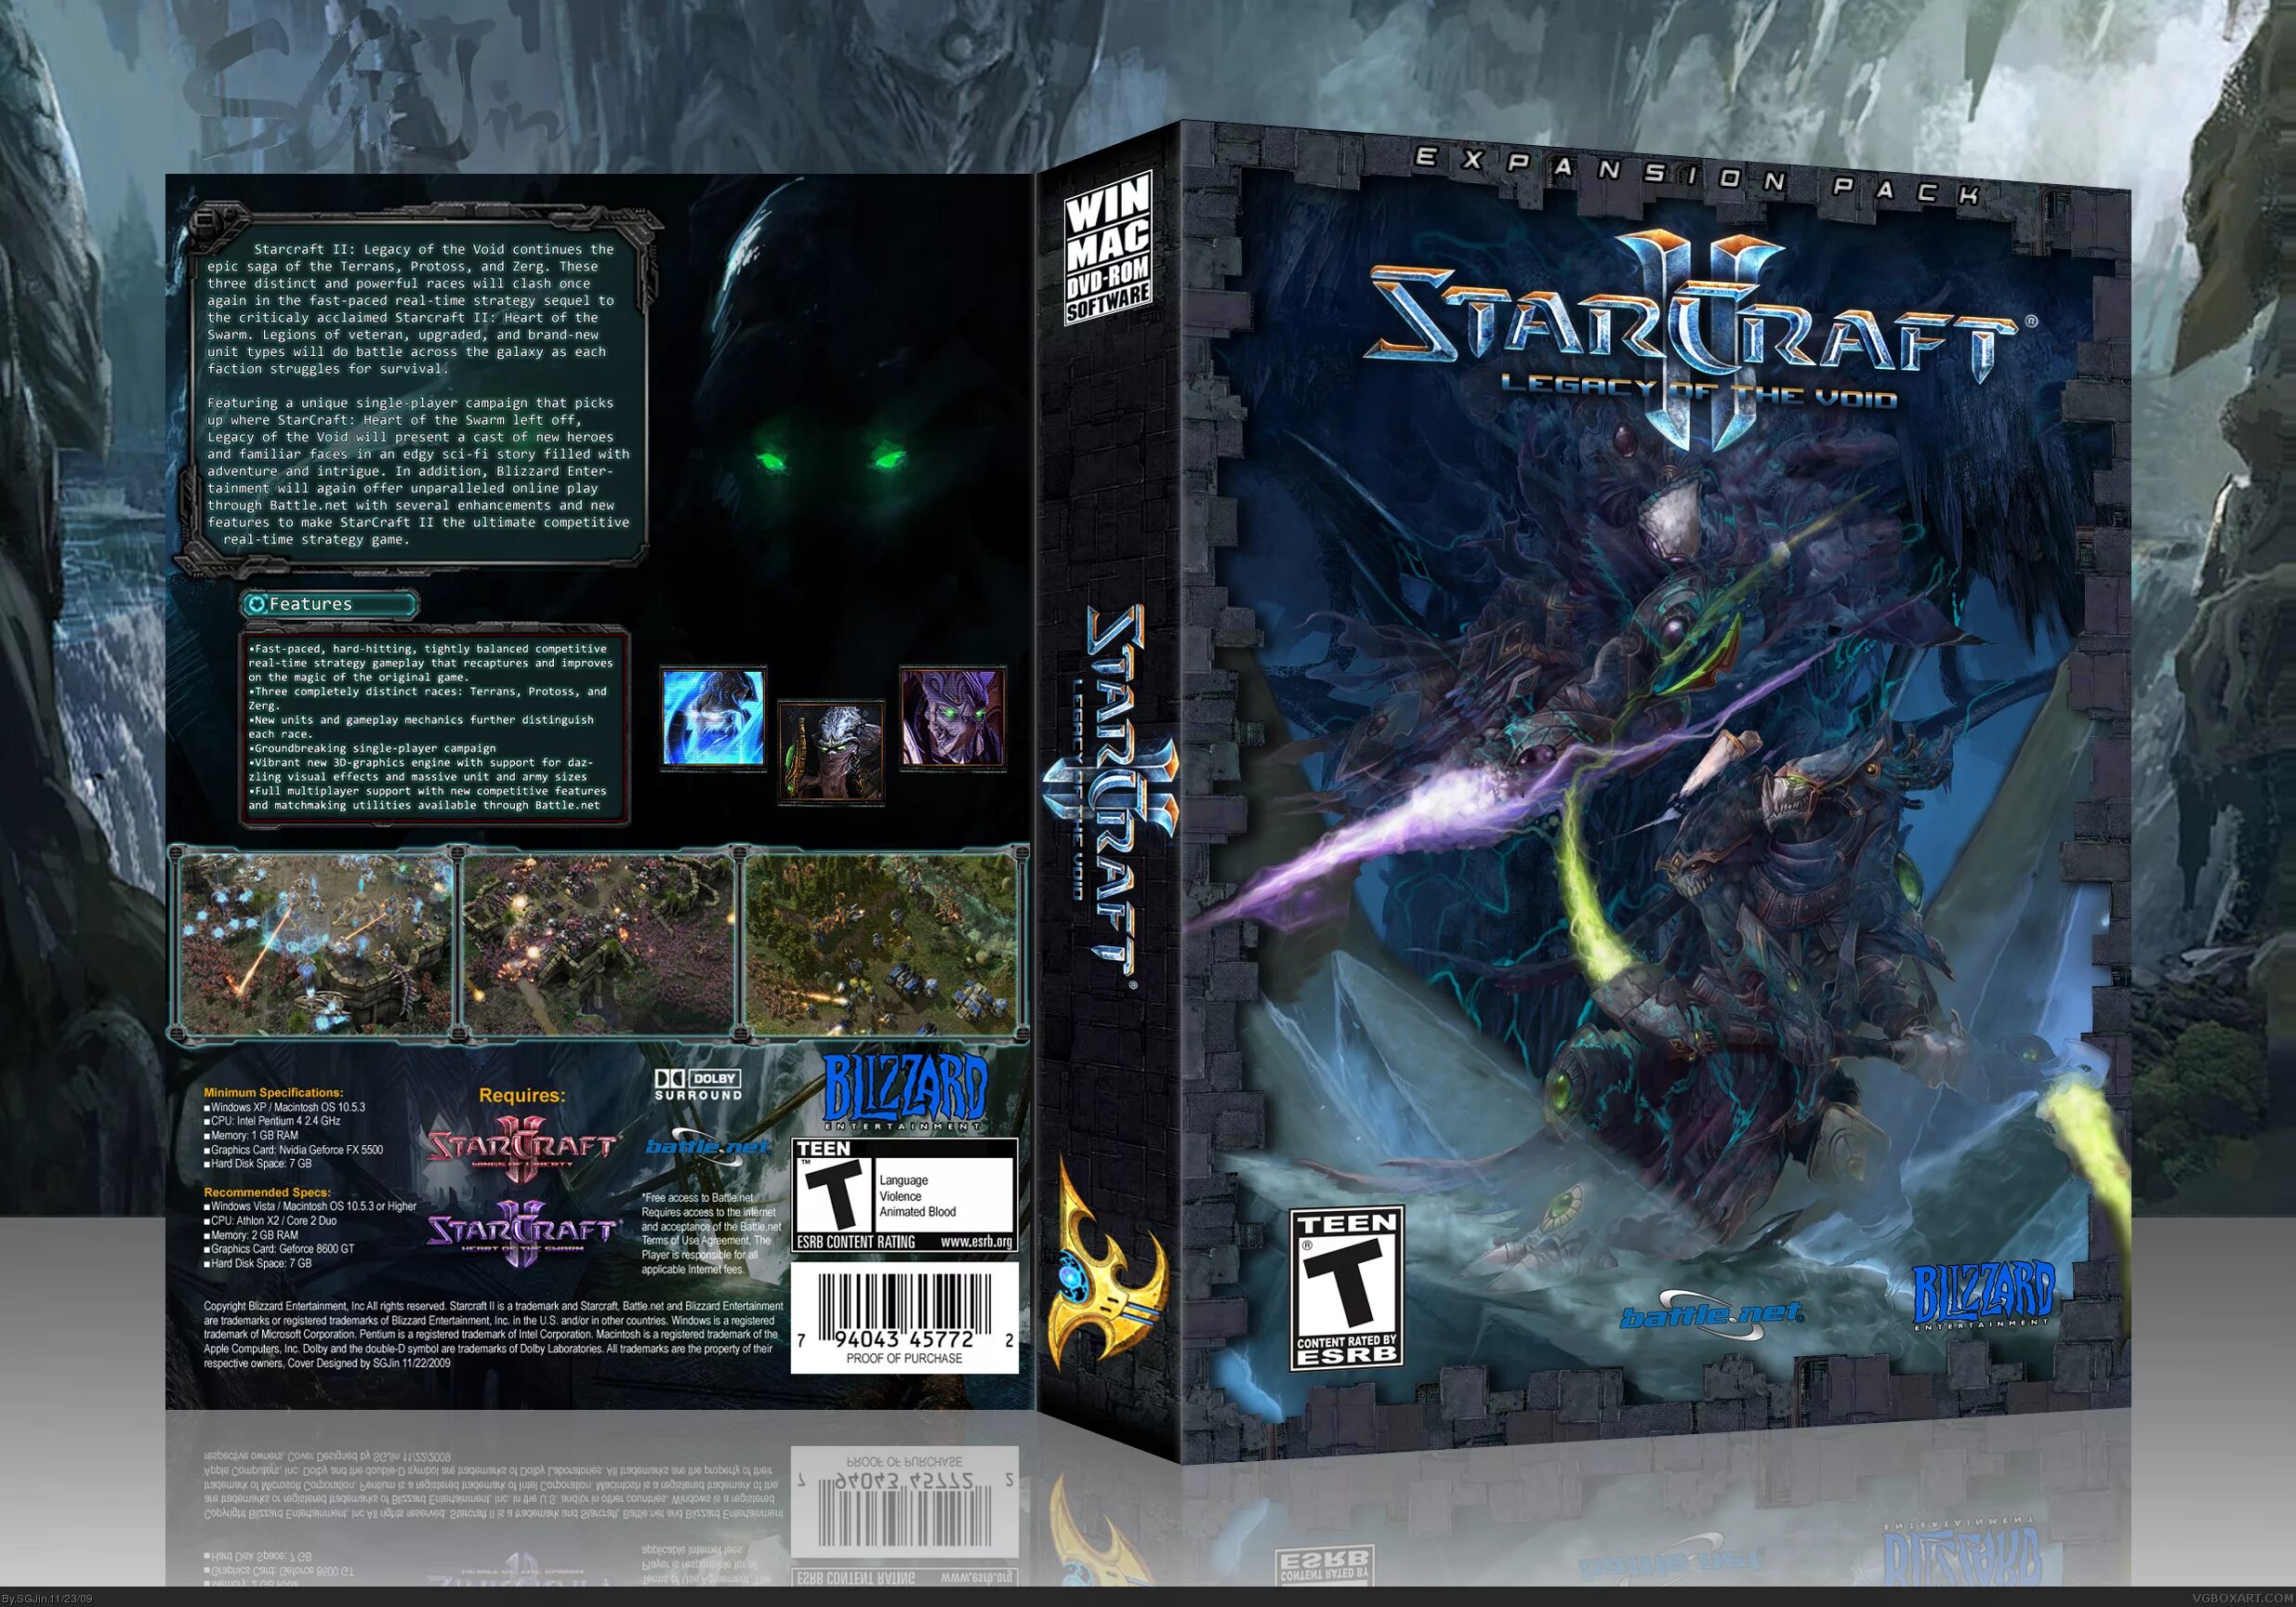 STARCRAFT 2 Legacy of the Void диск. STARCRAFT 2 Legacy of the Void обложка. Диск старкрафт 2 Legacy of the Void. Старкрафт Legacy of the Void.